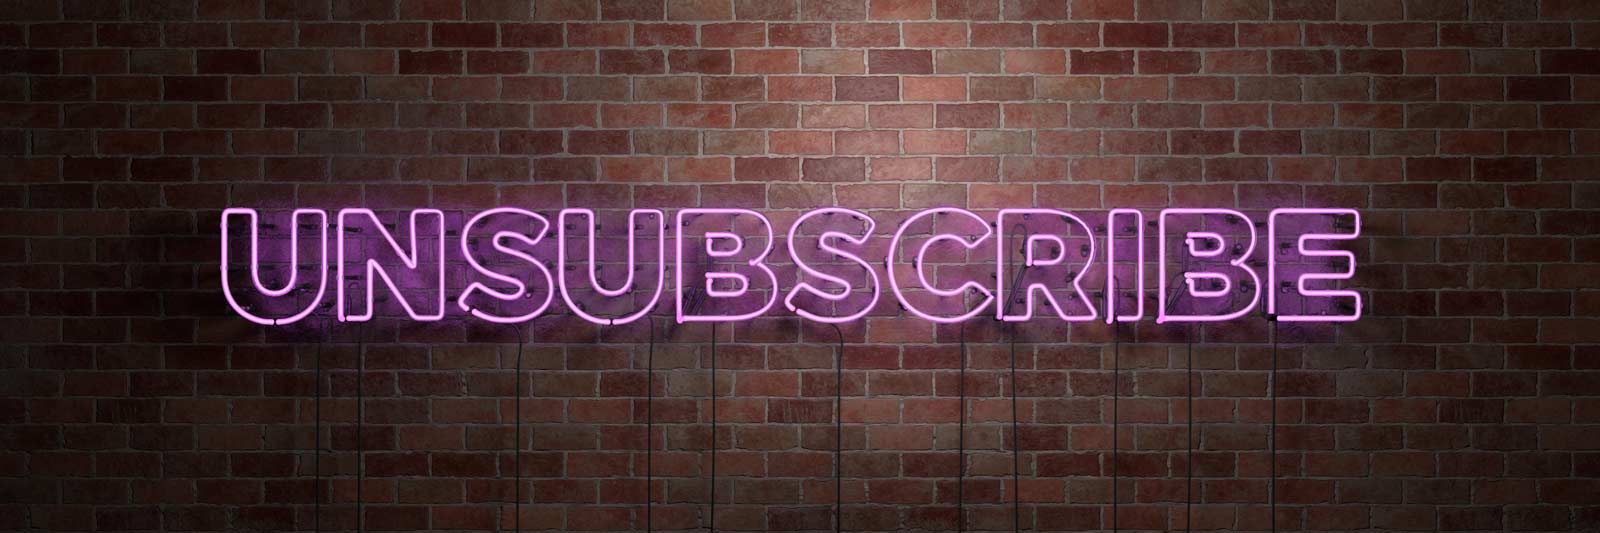 the words unsubscribe in neon lights on a brick wall